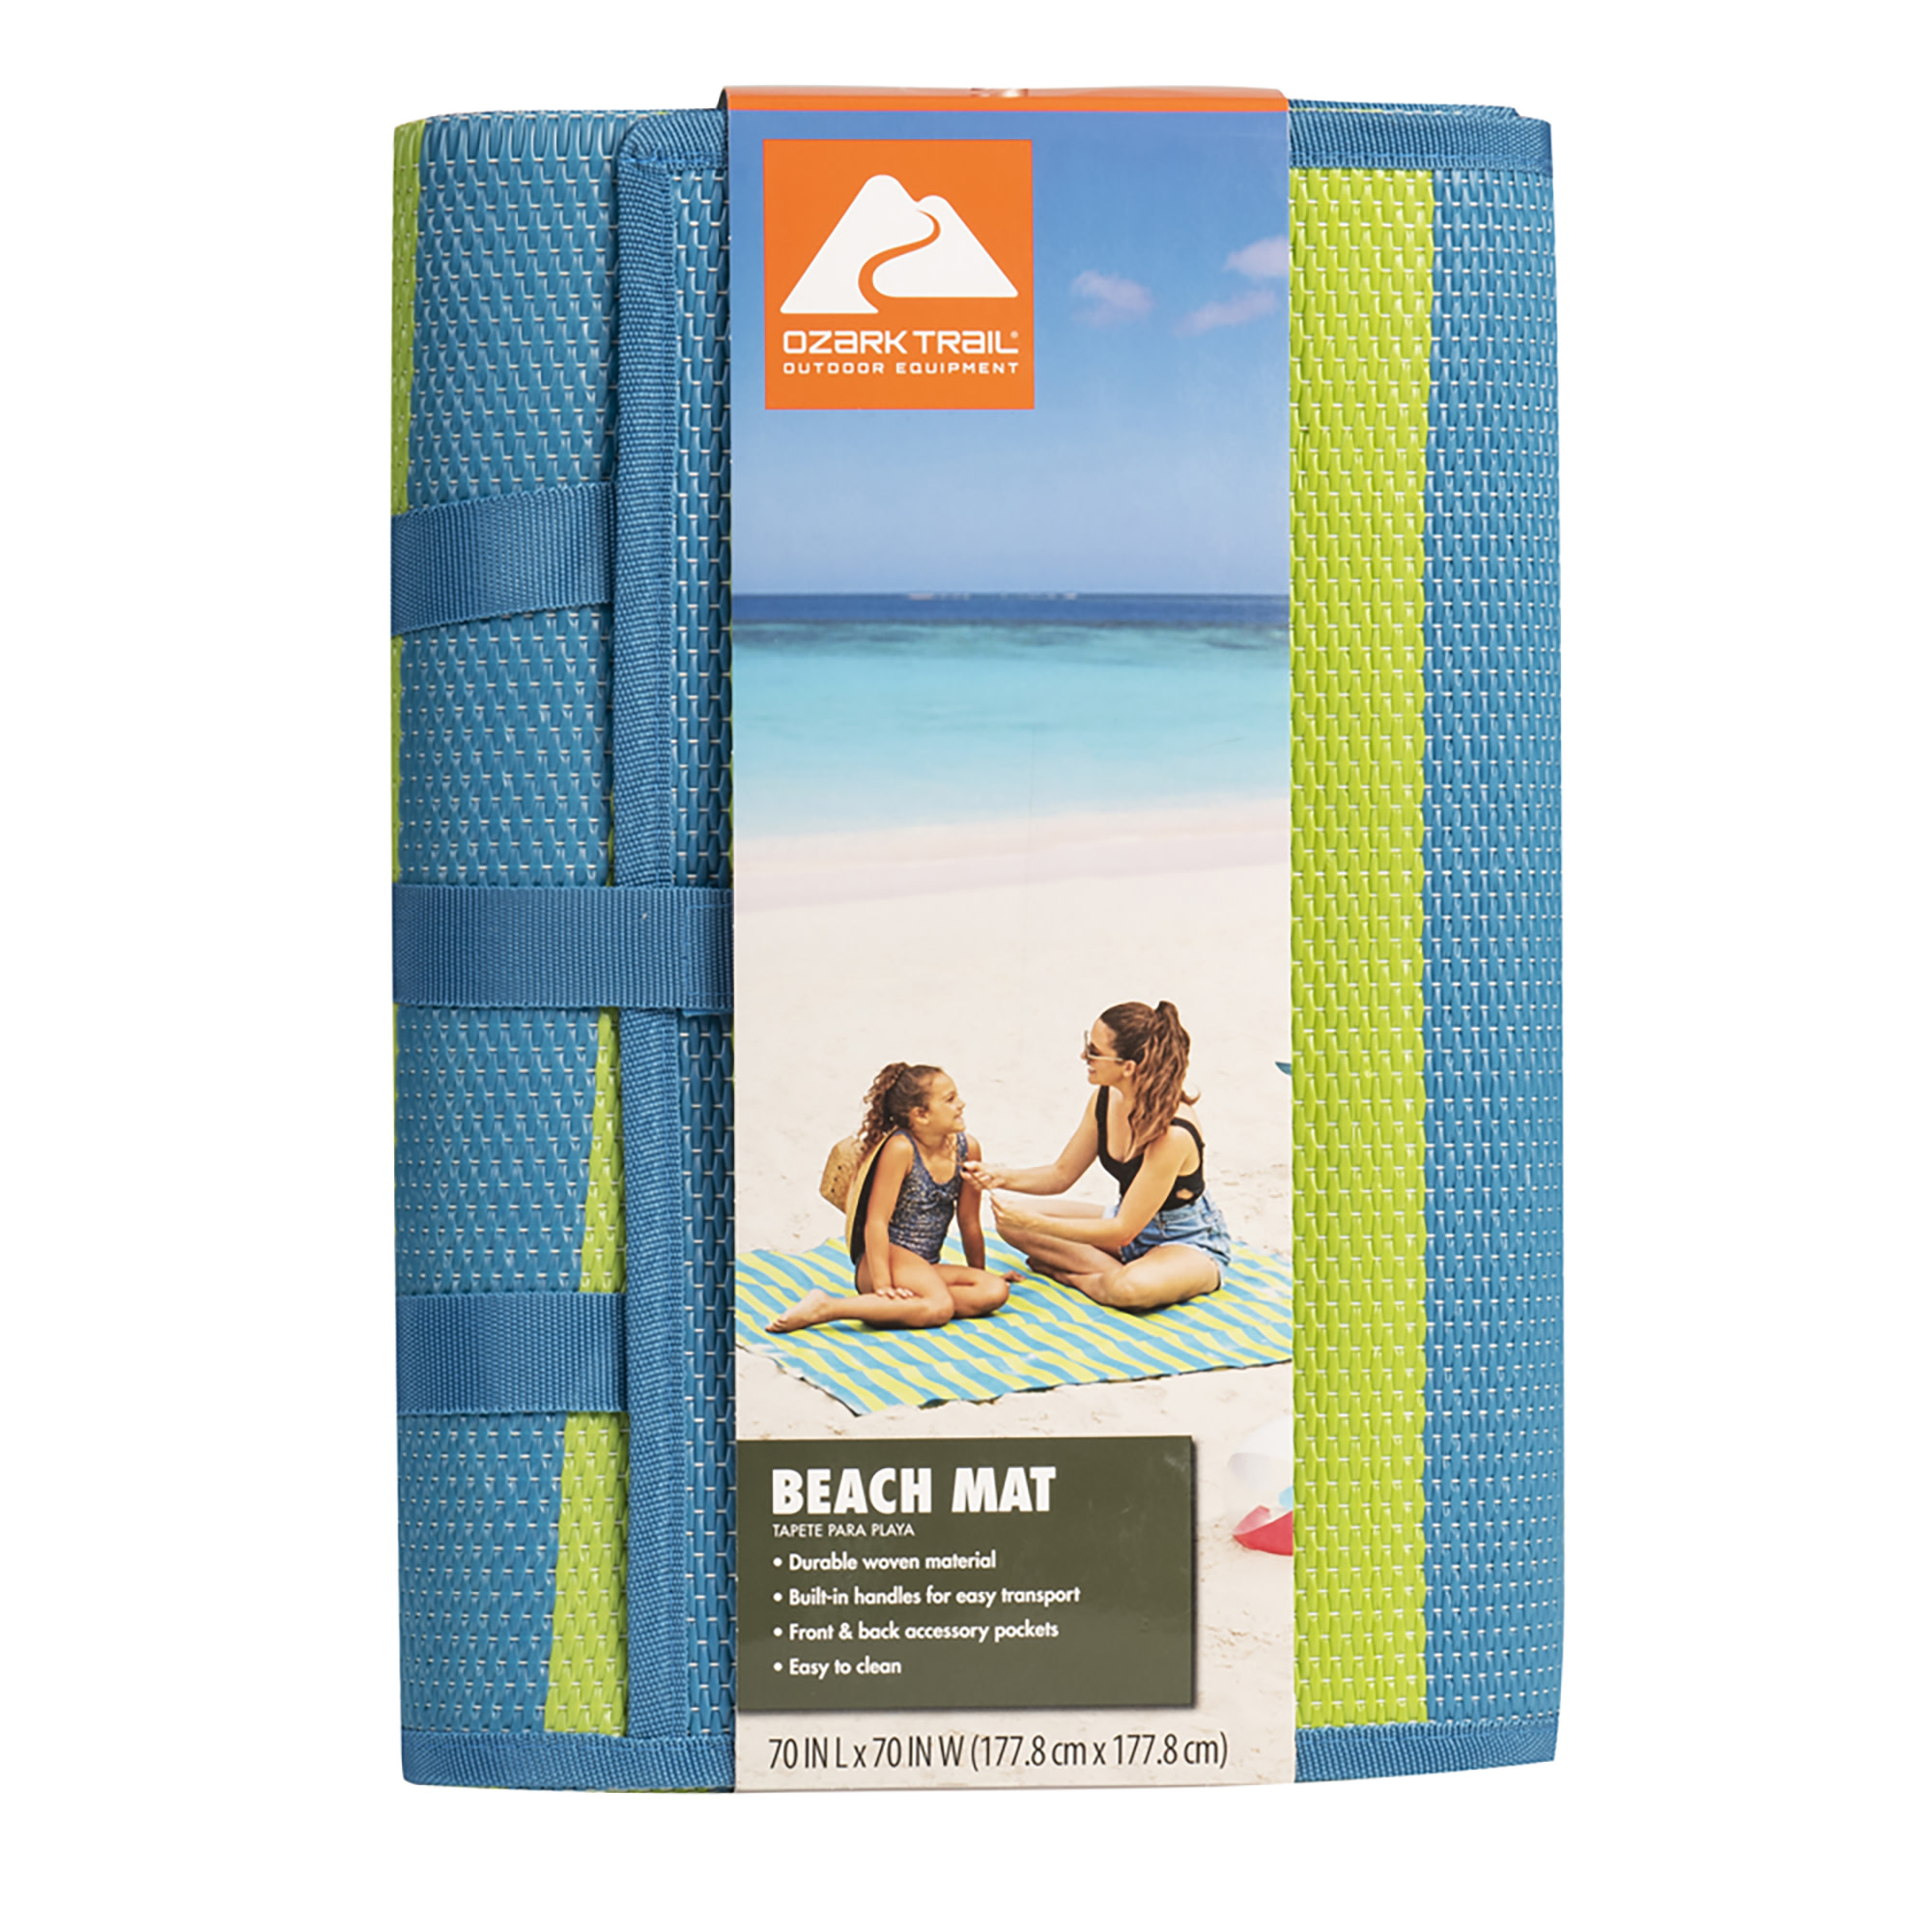 Ozark Trail Lightweight Turquoise/Green Beach Mat with Carry Straps, 70"x70" - image 1 of 5